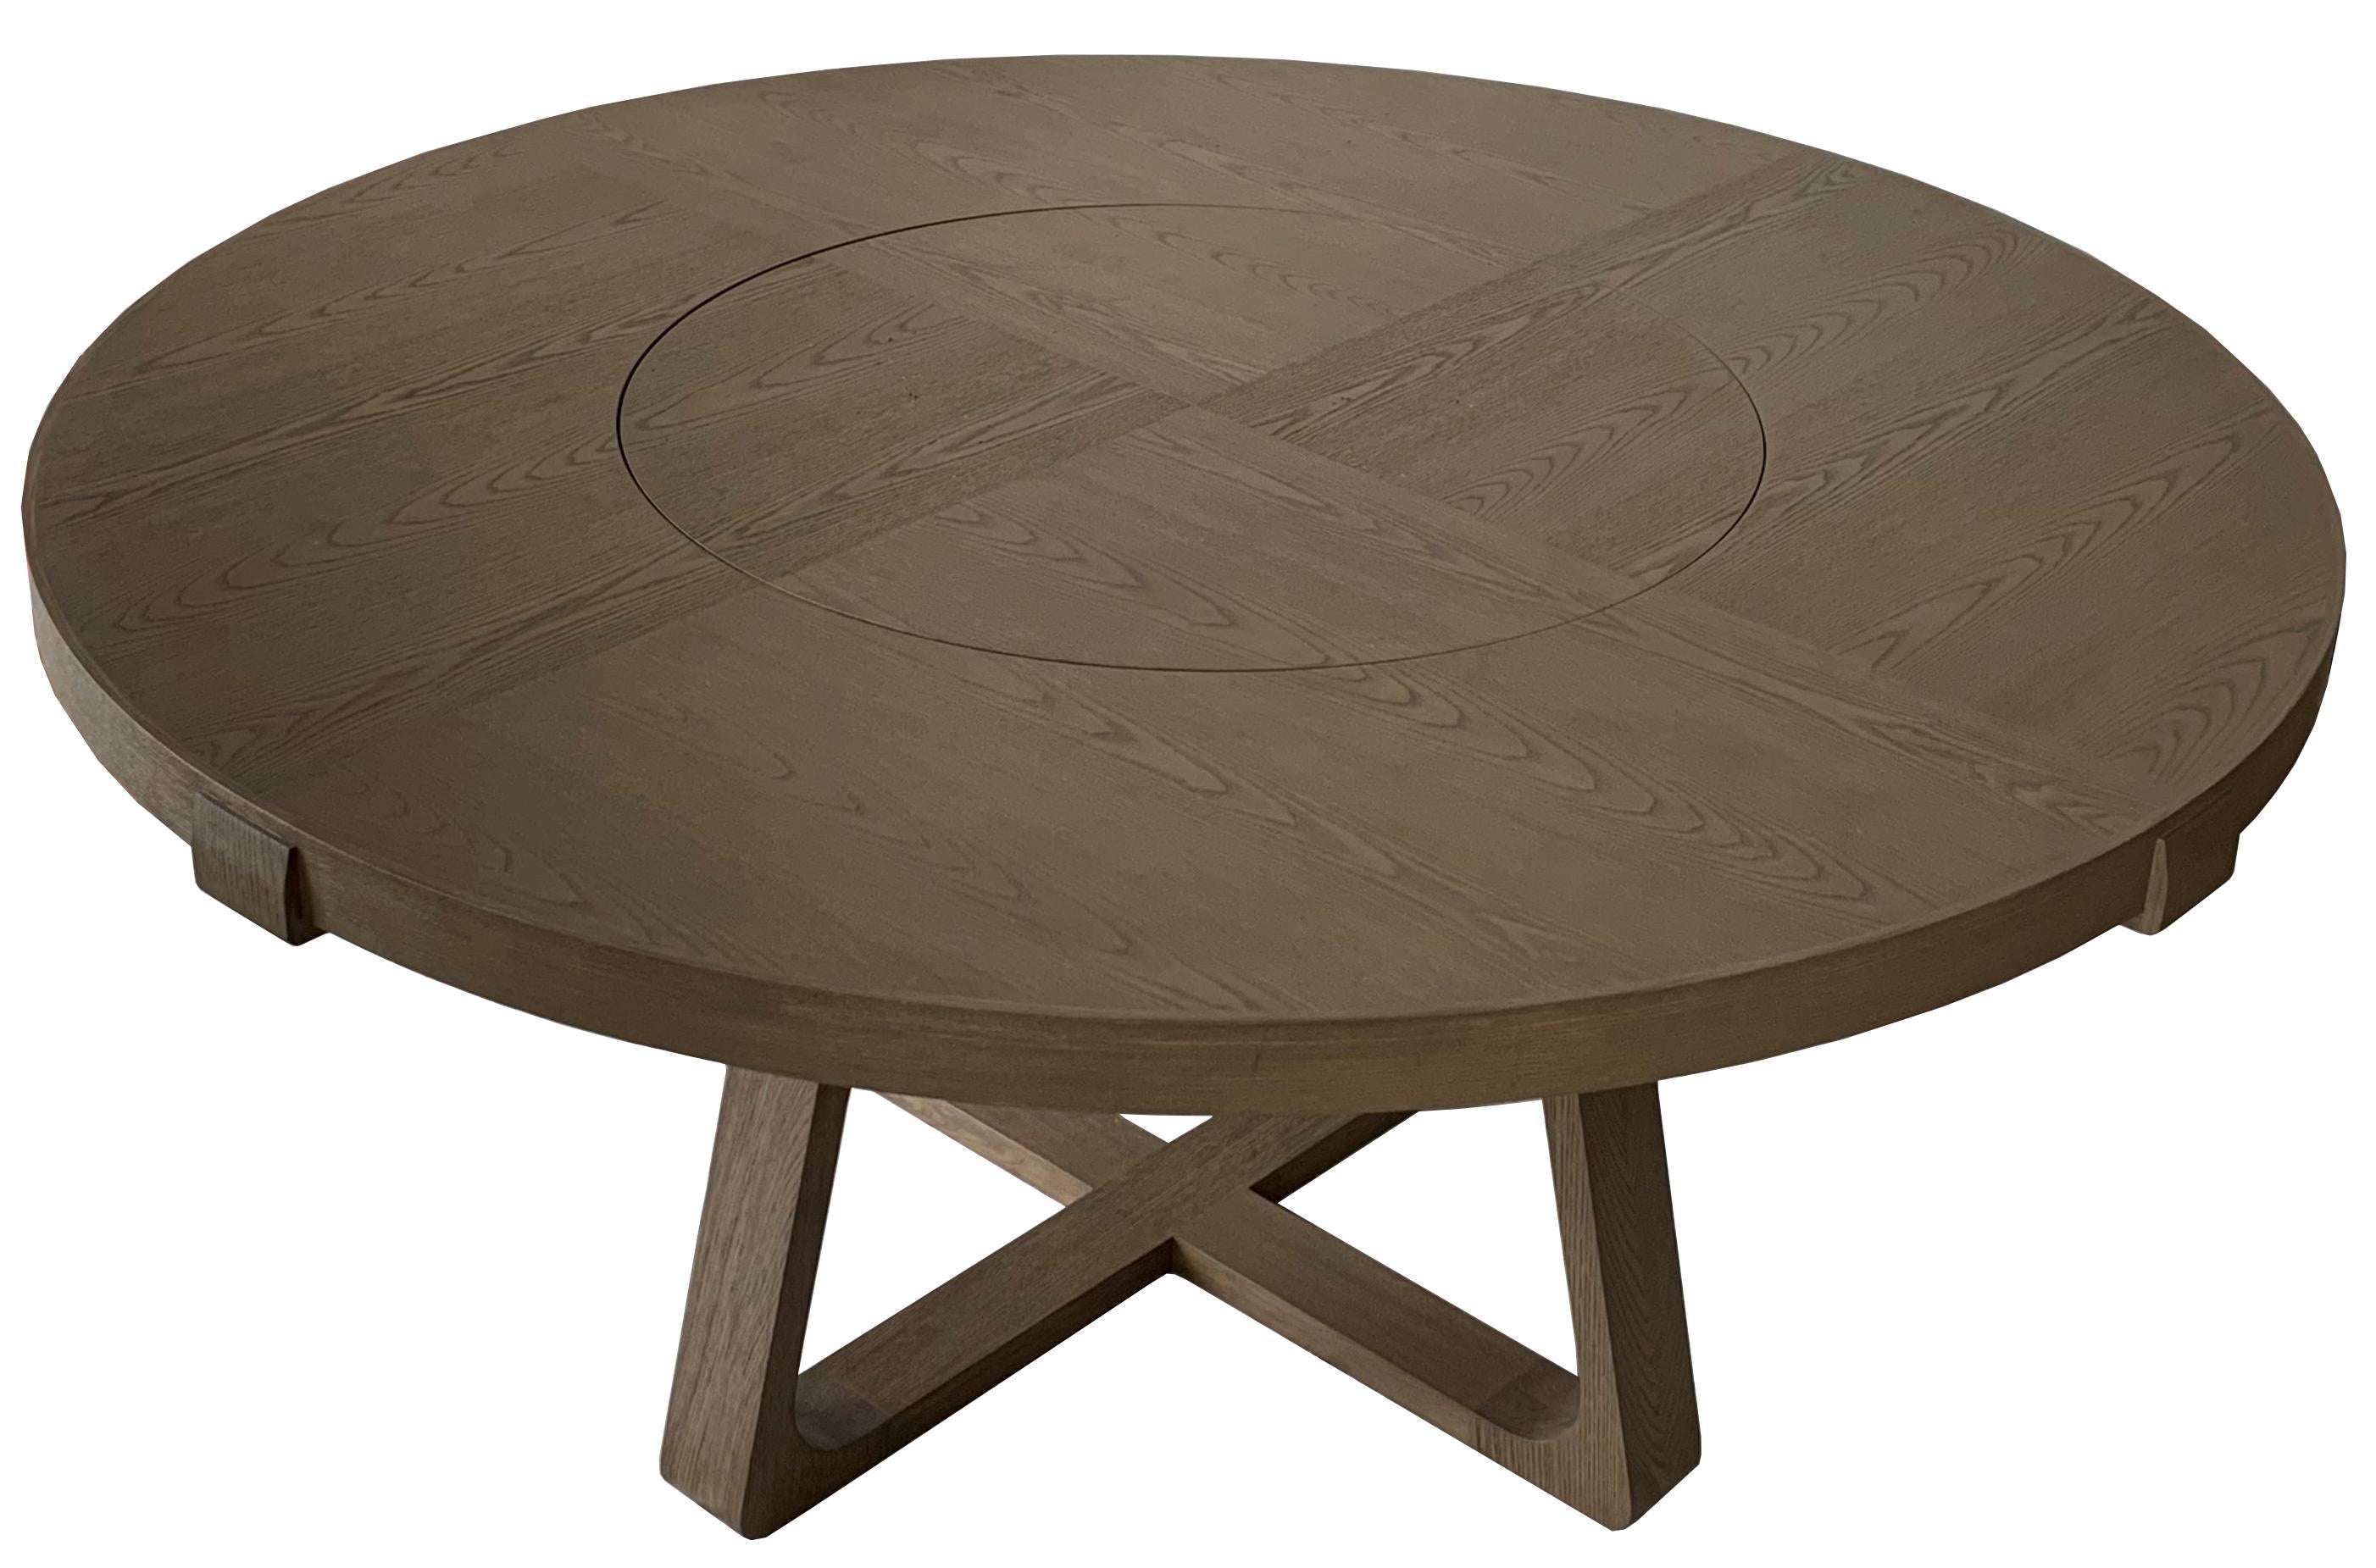 our timeless dining table is conceived to embrace a modern interpretation to traditional interlocking timber furniture. crafted in solid oak with a flushed lazy-susan, the table is adorned with intricate detailing and highly poetic profiles.